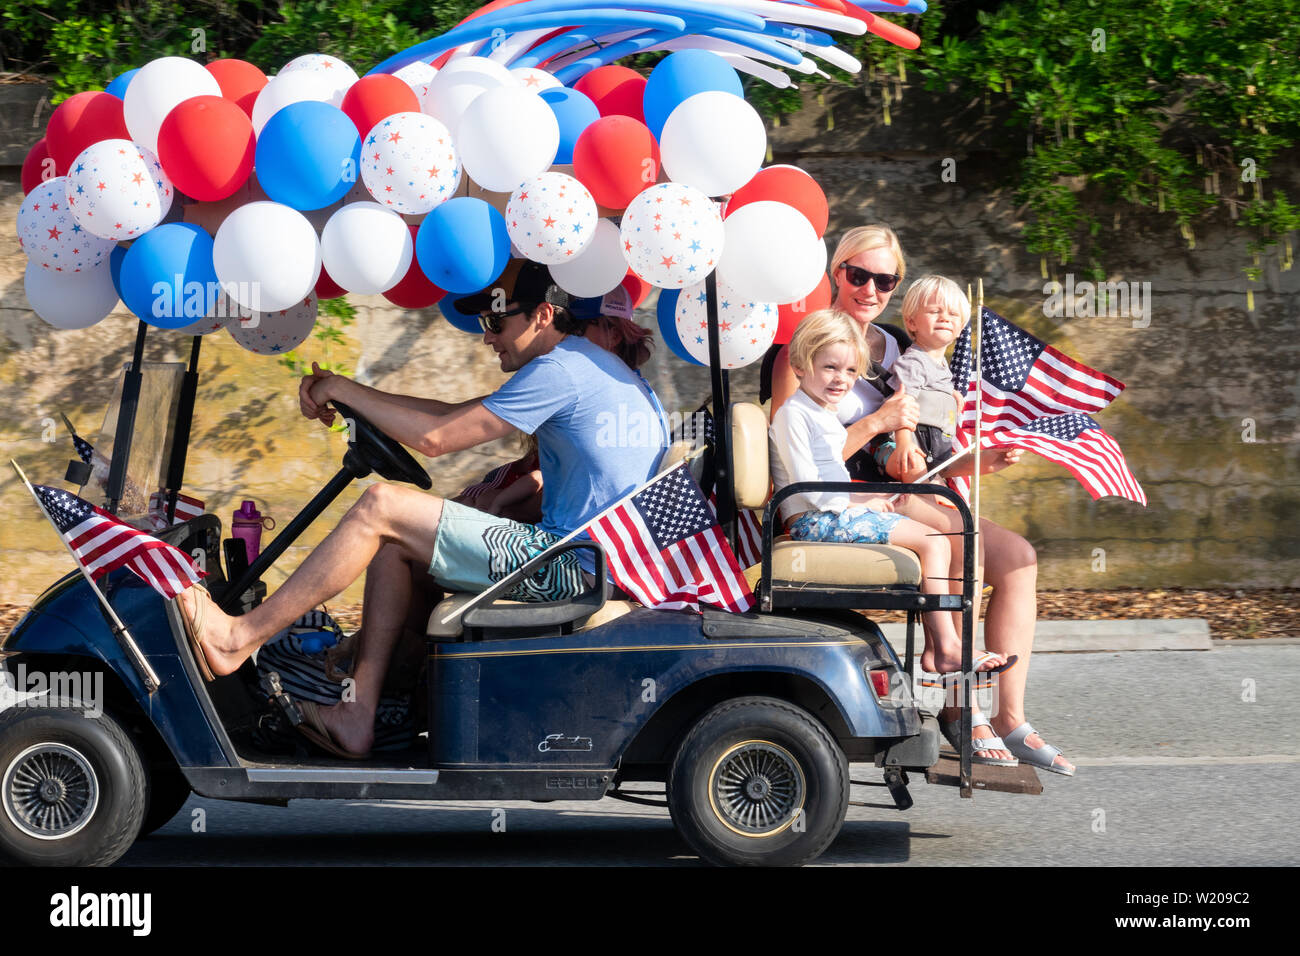 Sullivans Island South Carolina, USA. 4th July, 2019. A golf cart float decorated in balloons and flags during the annual Independence Day parade July 4, 2019 in Sullivan's Island, South Carolina. The tiny Sea Island beach community across from Charleston, was once a quarantine station for enslaved Africans, and is now one of the most affluent, least diverse communities with one of highest per capita real estate costs in the United States. Credit: Planetpix/Alamy Live News Stock Photo